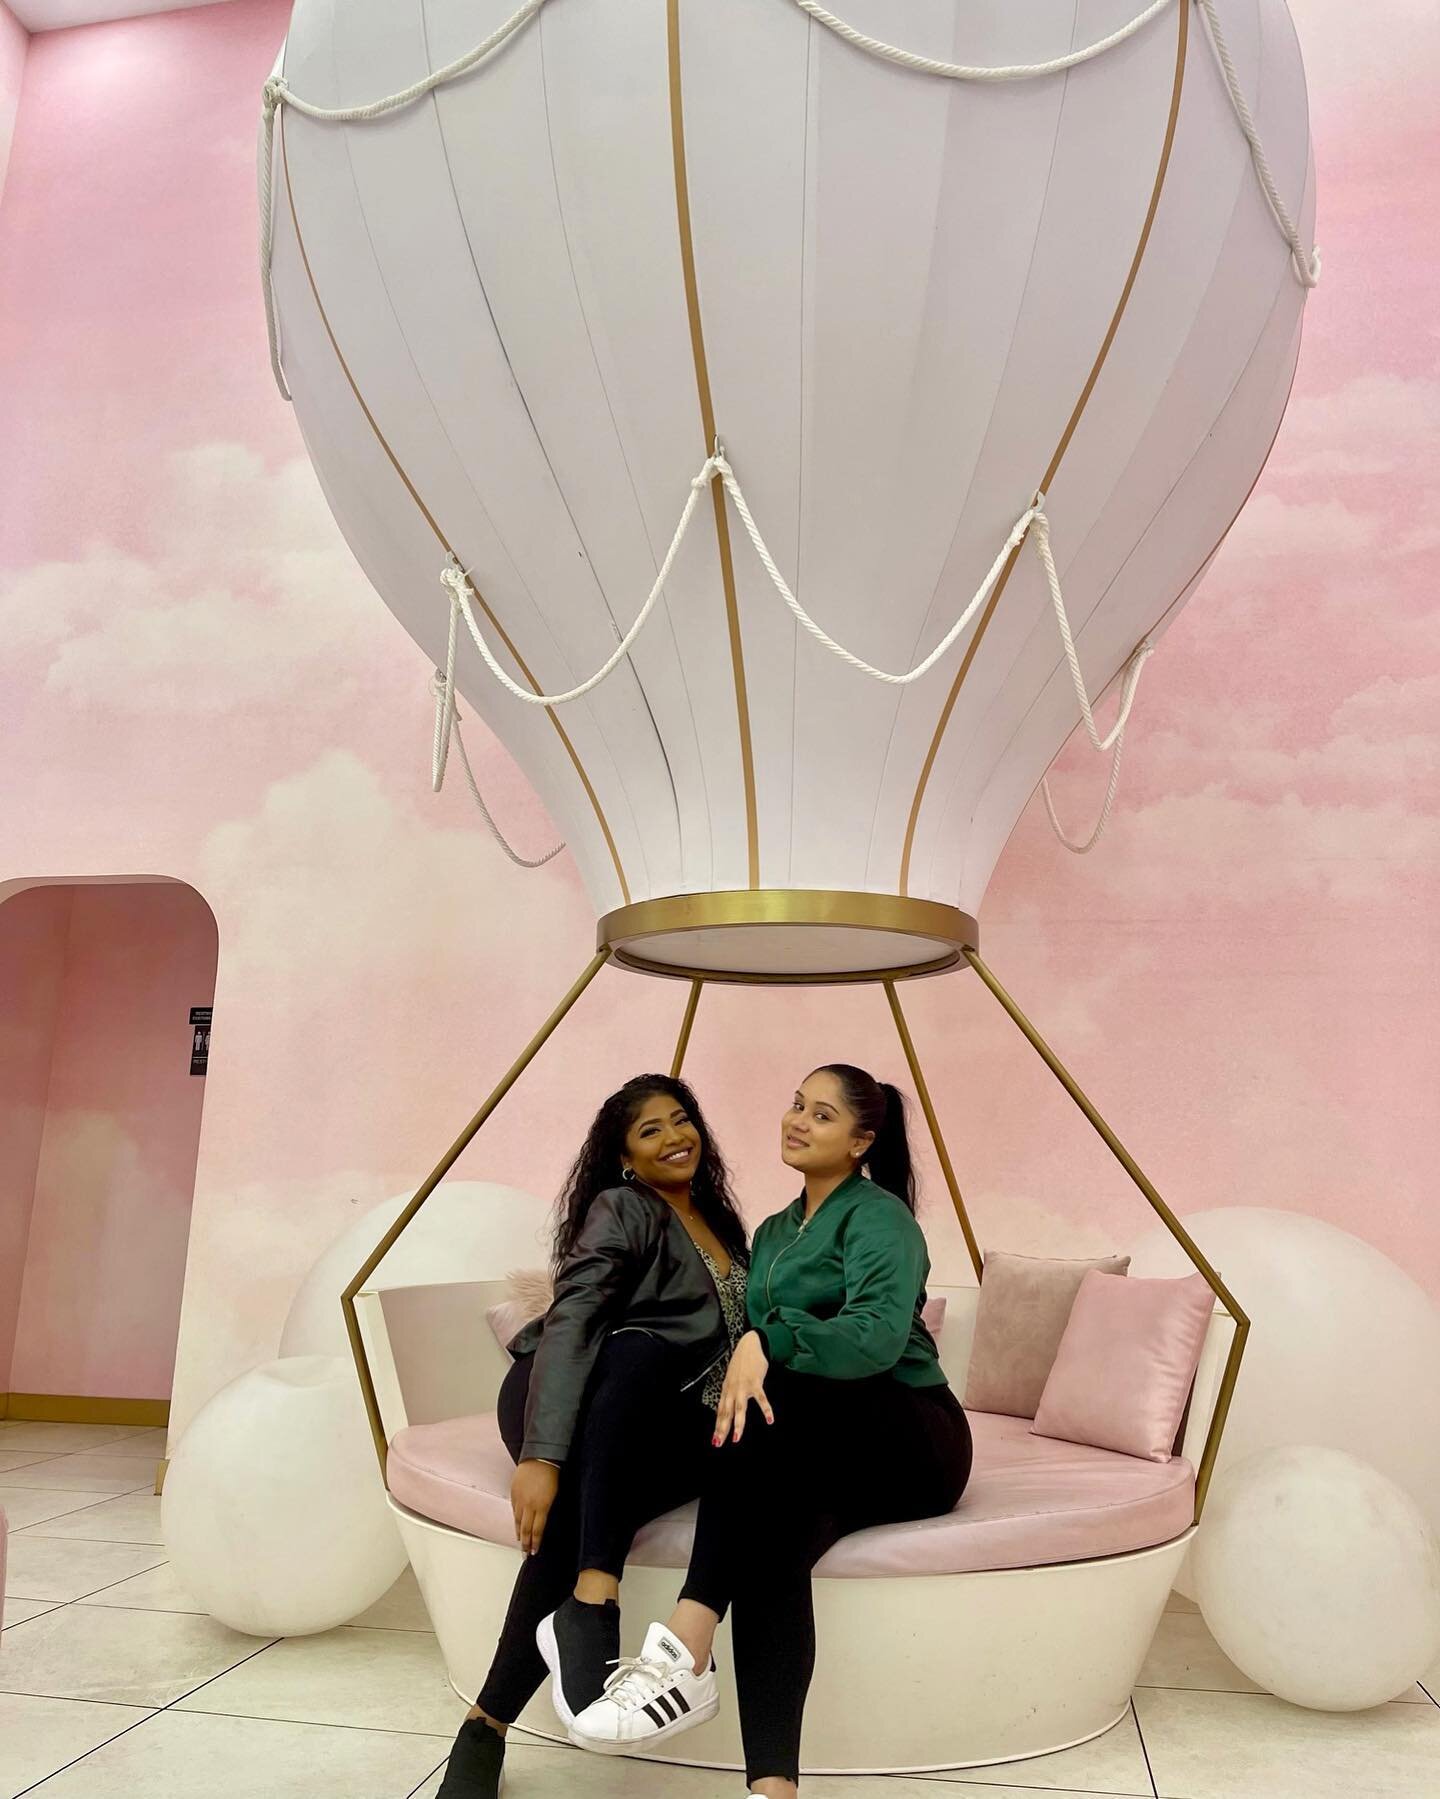 The cutest tea spot in Flushing @mteausa . 

From rose bubble tea to lavender cheesecake this place is a great meeting spot for catching up girlfriends or satisfying your sweet tooth. 

@saritanauth and I met up for a total girl power sesh! Check out